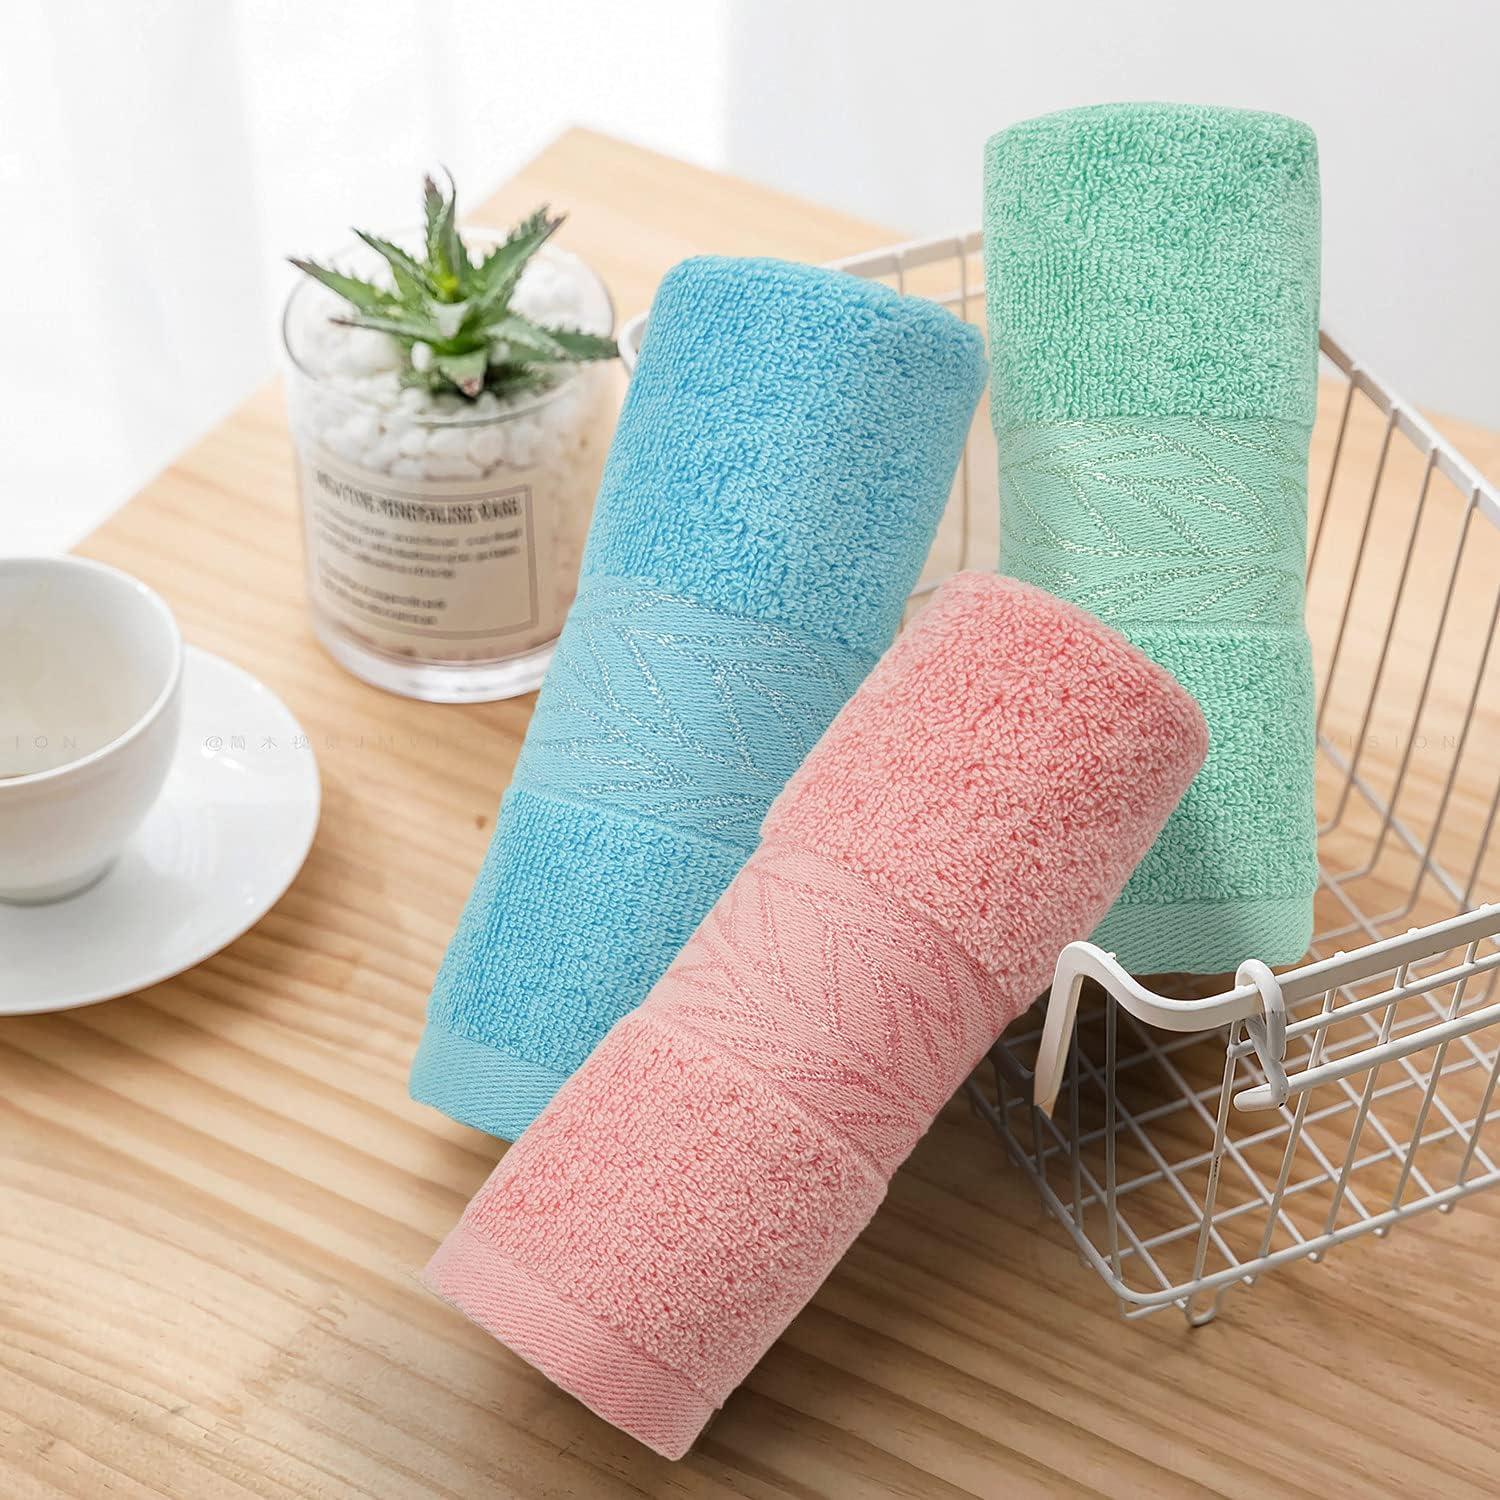 Cleanbear Washcloth Face Towels 6 Pack Wash Cloths for Bathrooms 13 by 13  Inches Large Washcloths with Decorative Patterns 3 Colors for Your  Different Family Members Sakura Pink Baby Blue Seafoam Green